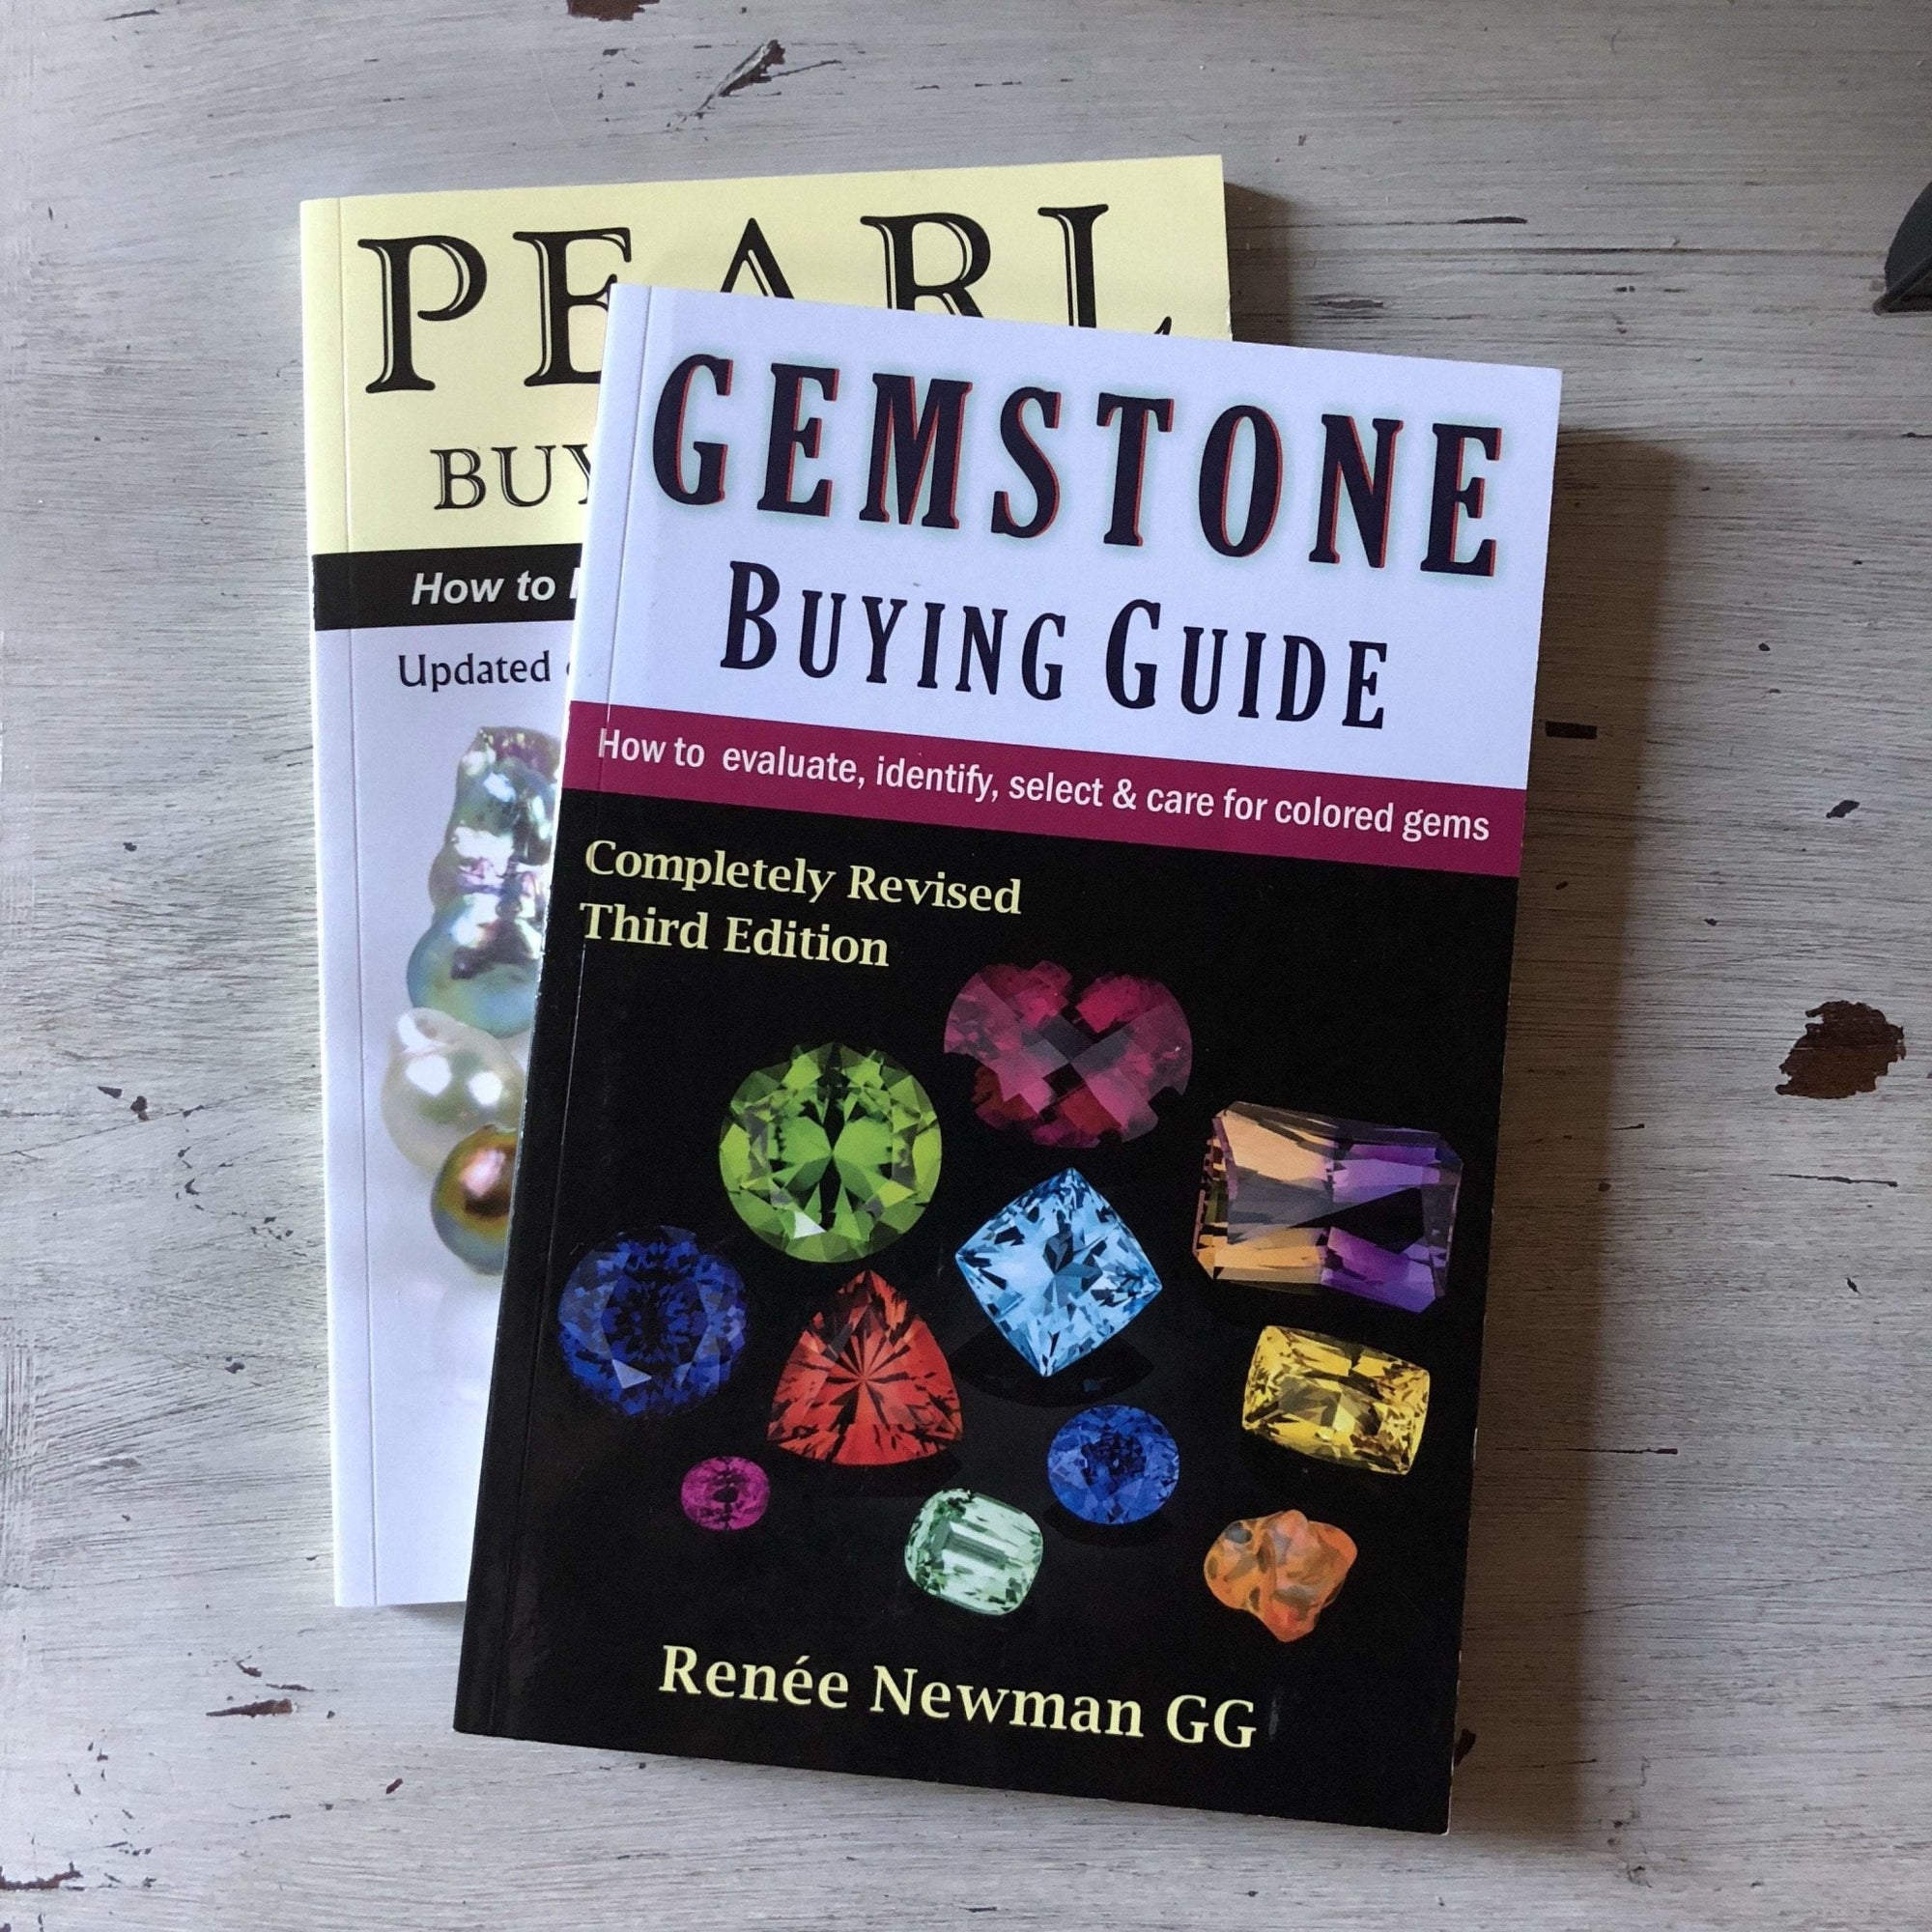 Ashleigh Branstetter Cufflinks and Earrings Featured in Gemstone and Pearl Buying Guides - Ashleigh Branstetter®